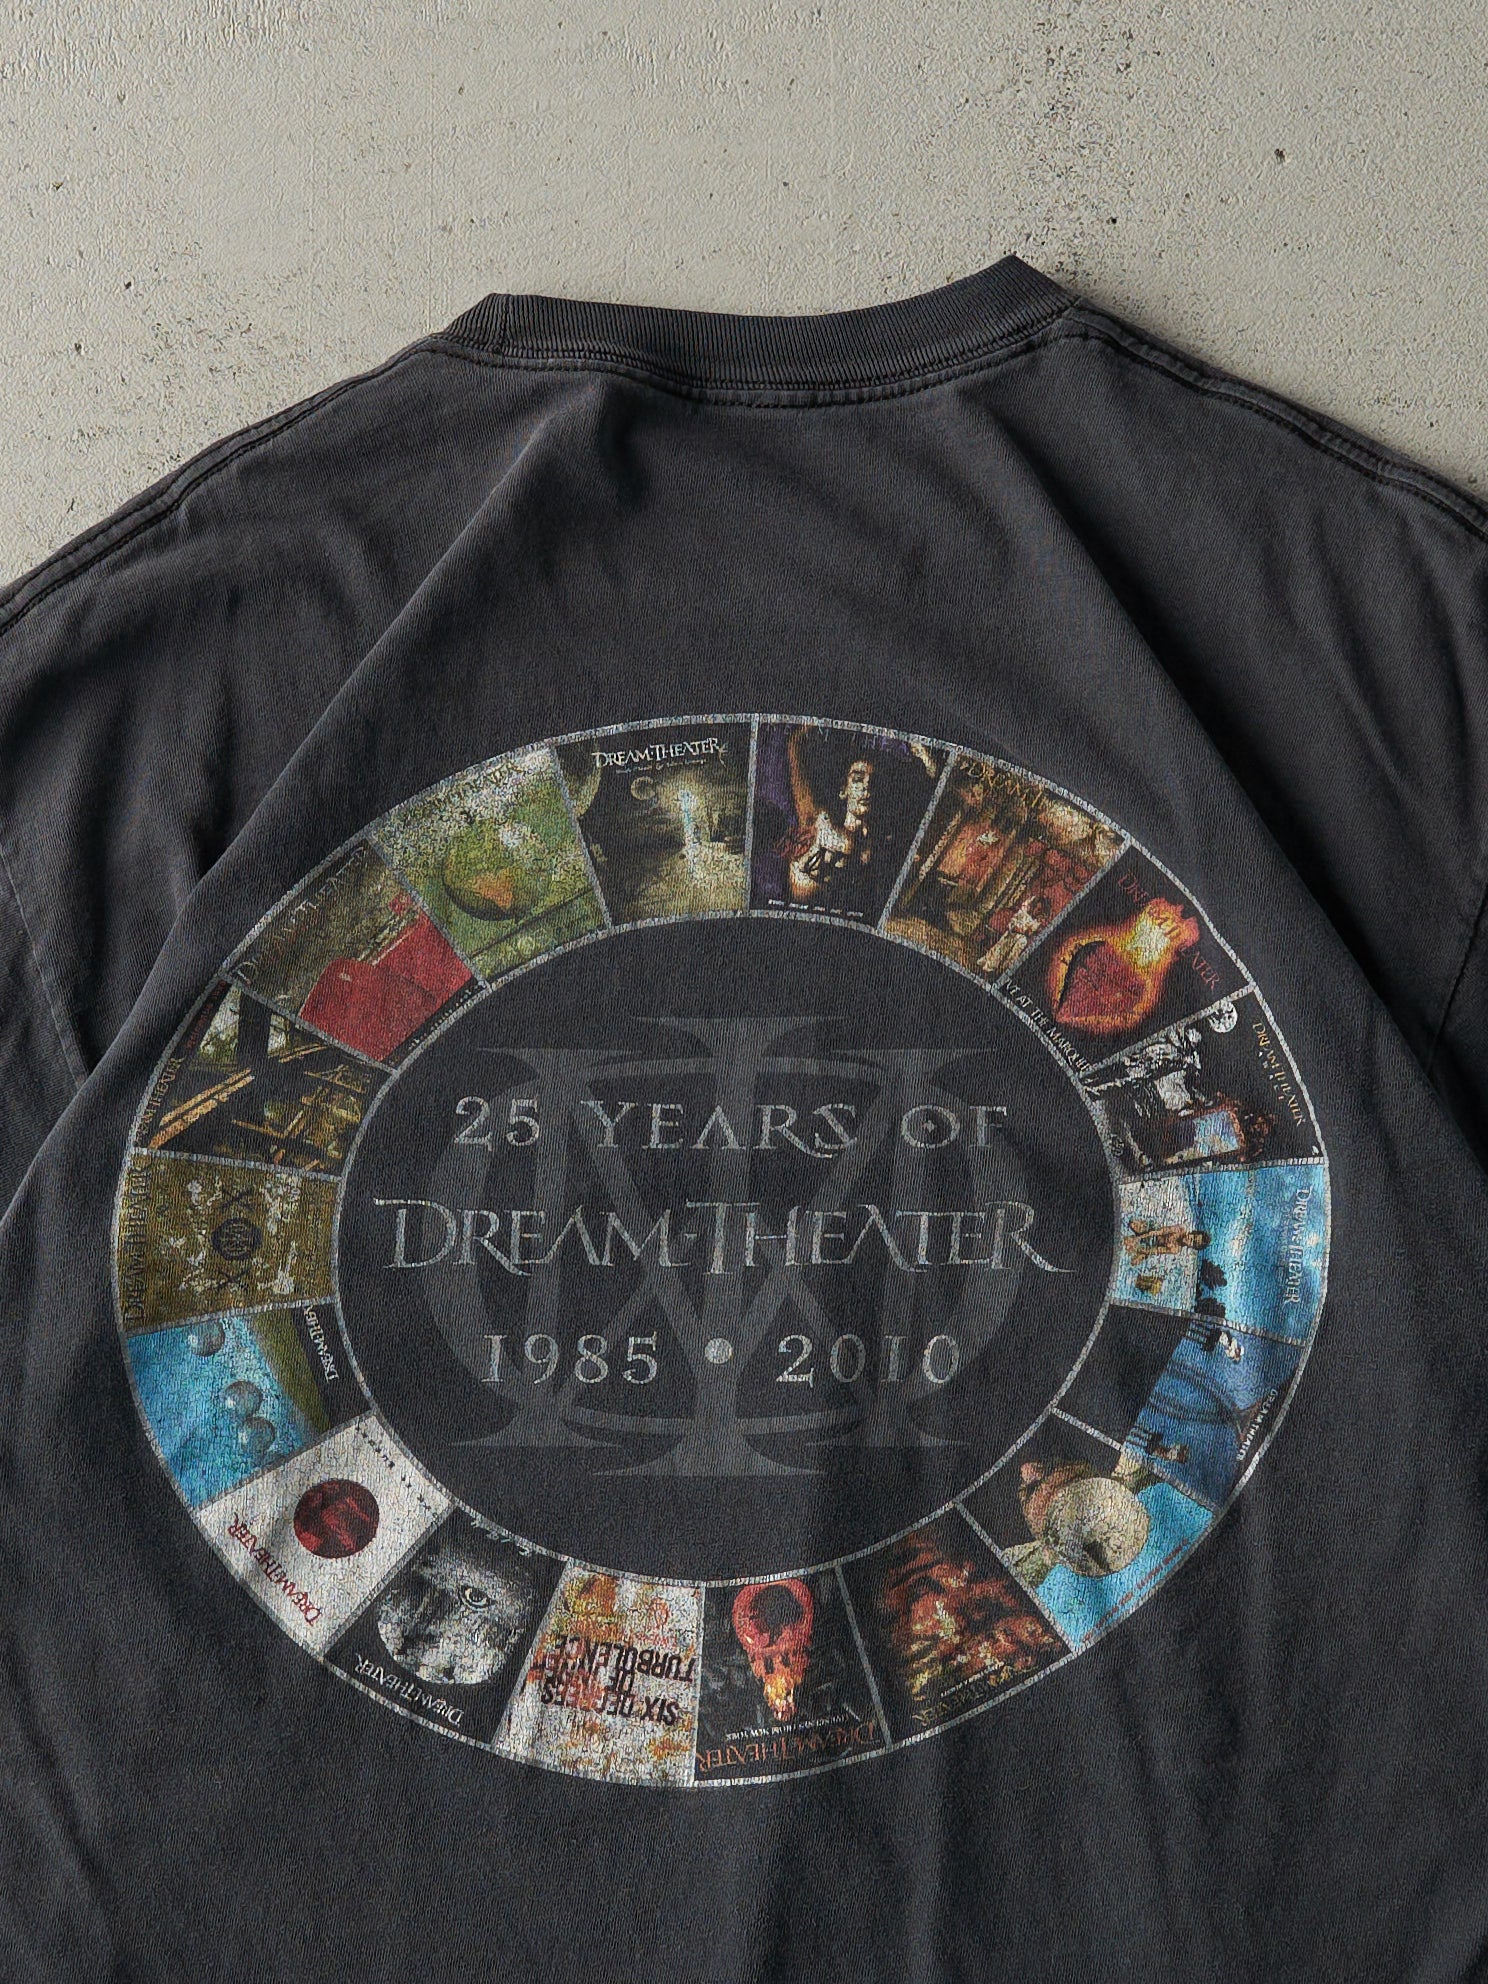 Vintage 10' Faded Black Dream Theater Black Clouds & Silver Anniversary Tee (M/L)